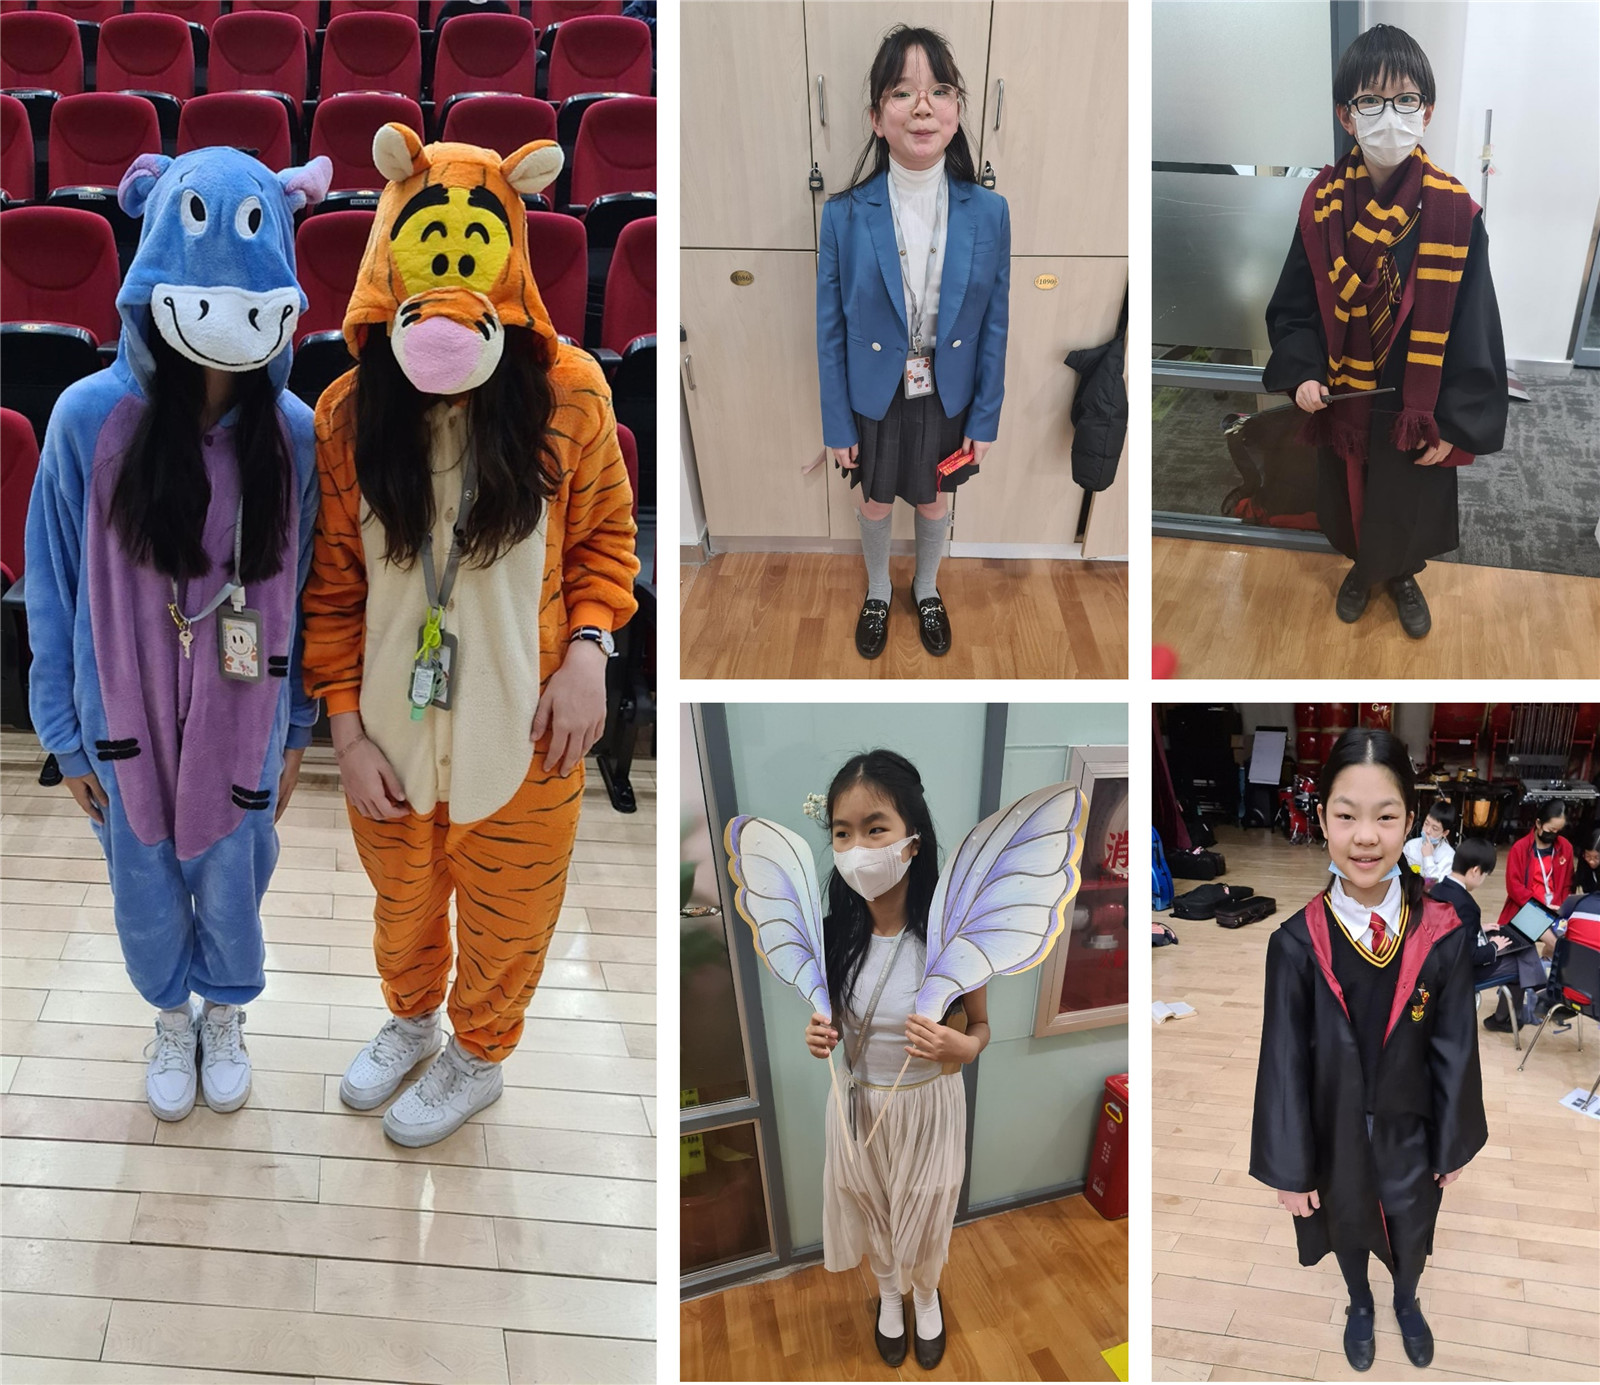 Students dressed up